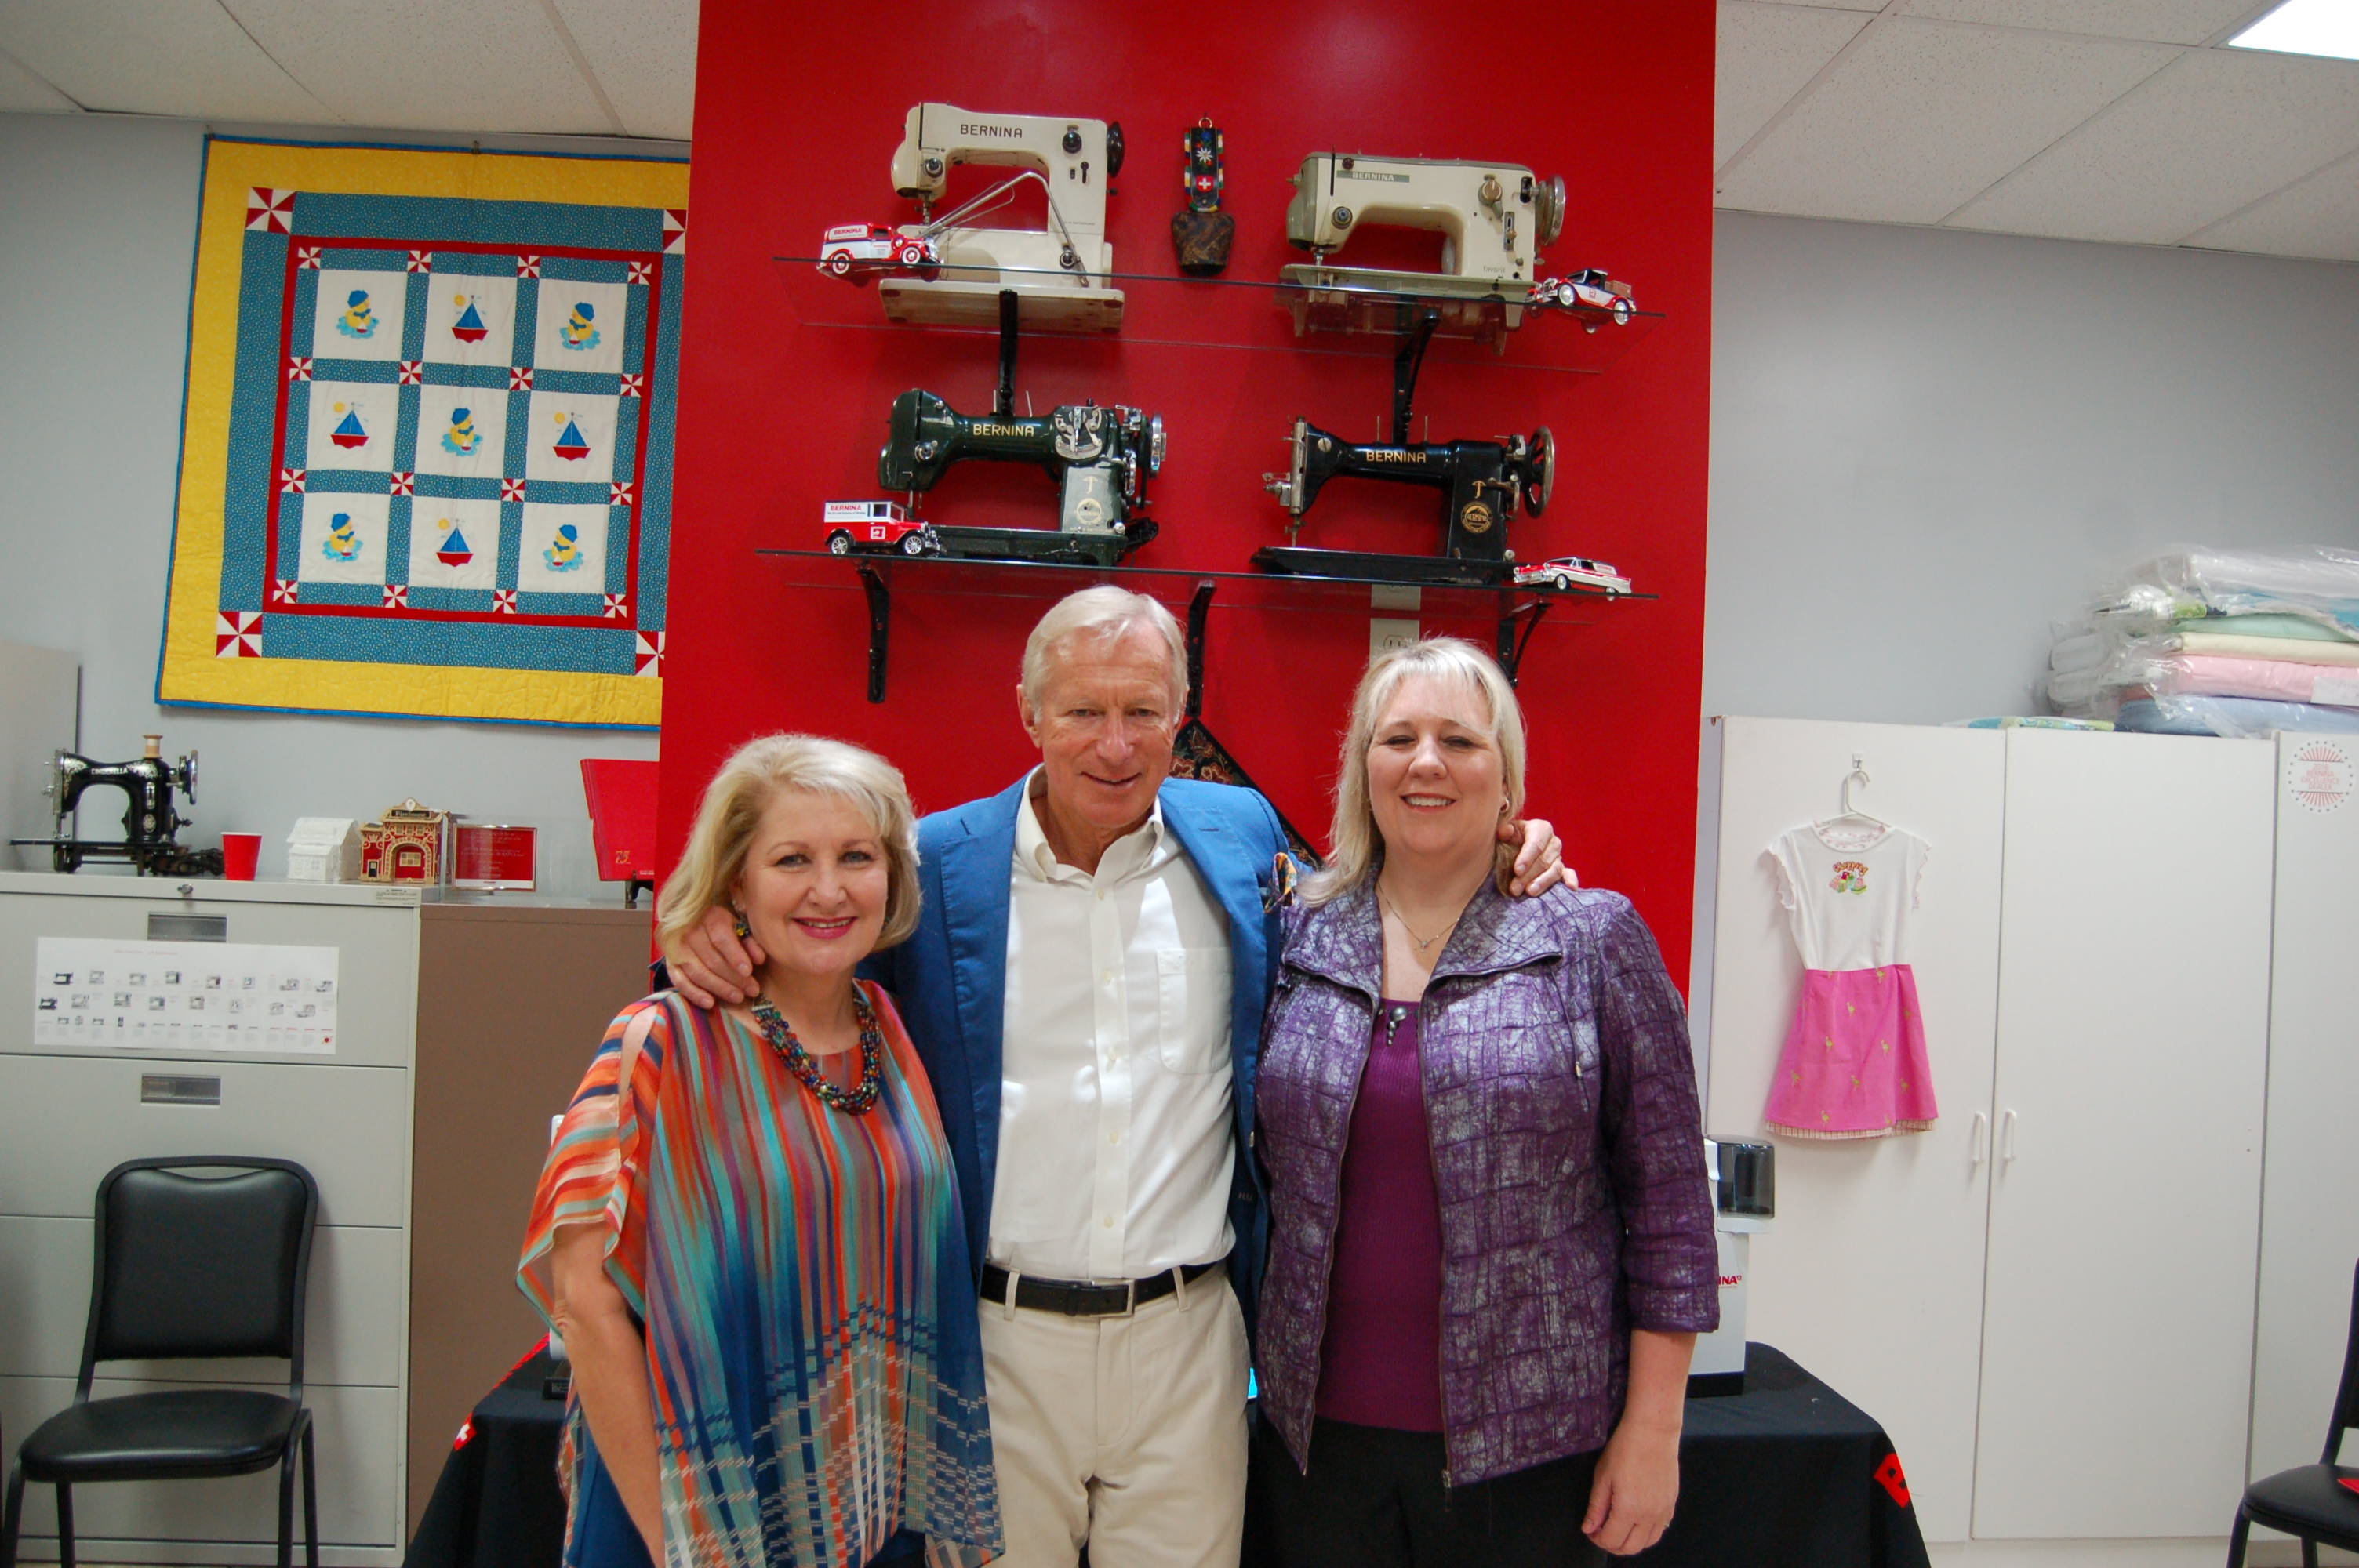 President of Bernina sewing machines a guest at Robin's Sewing Shop